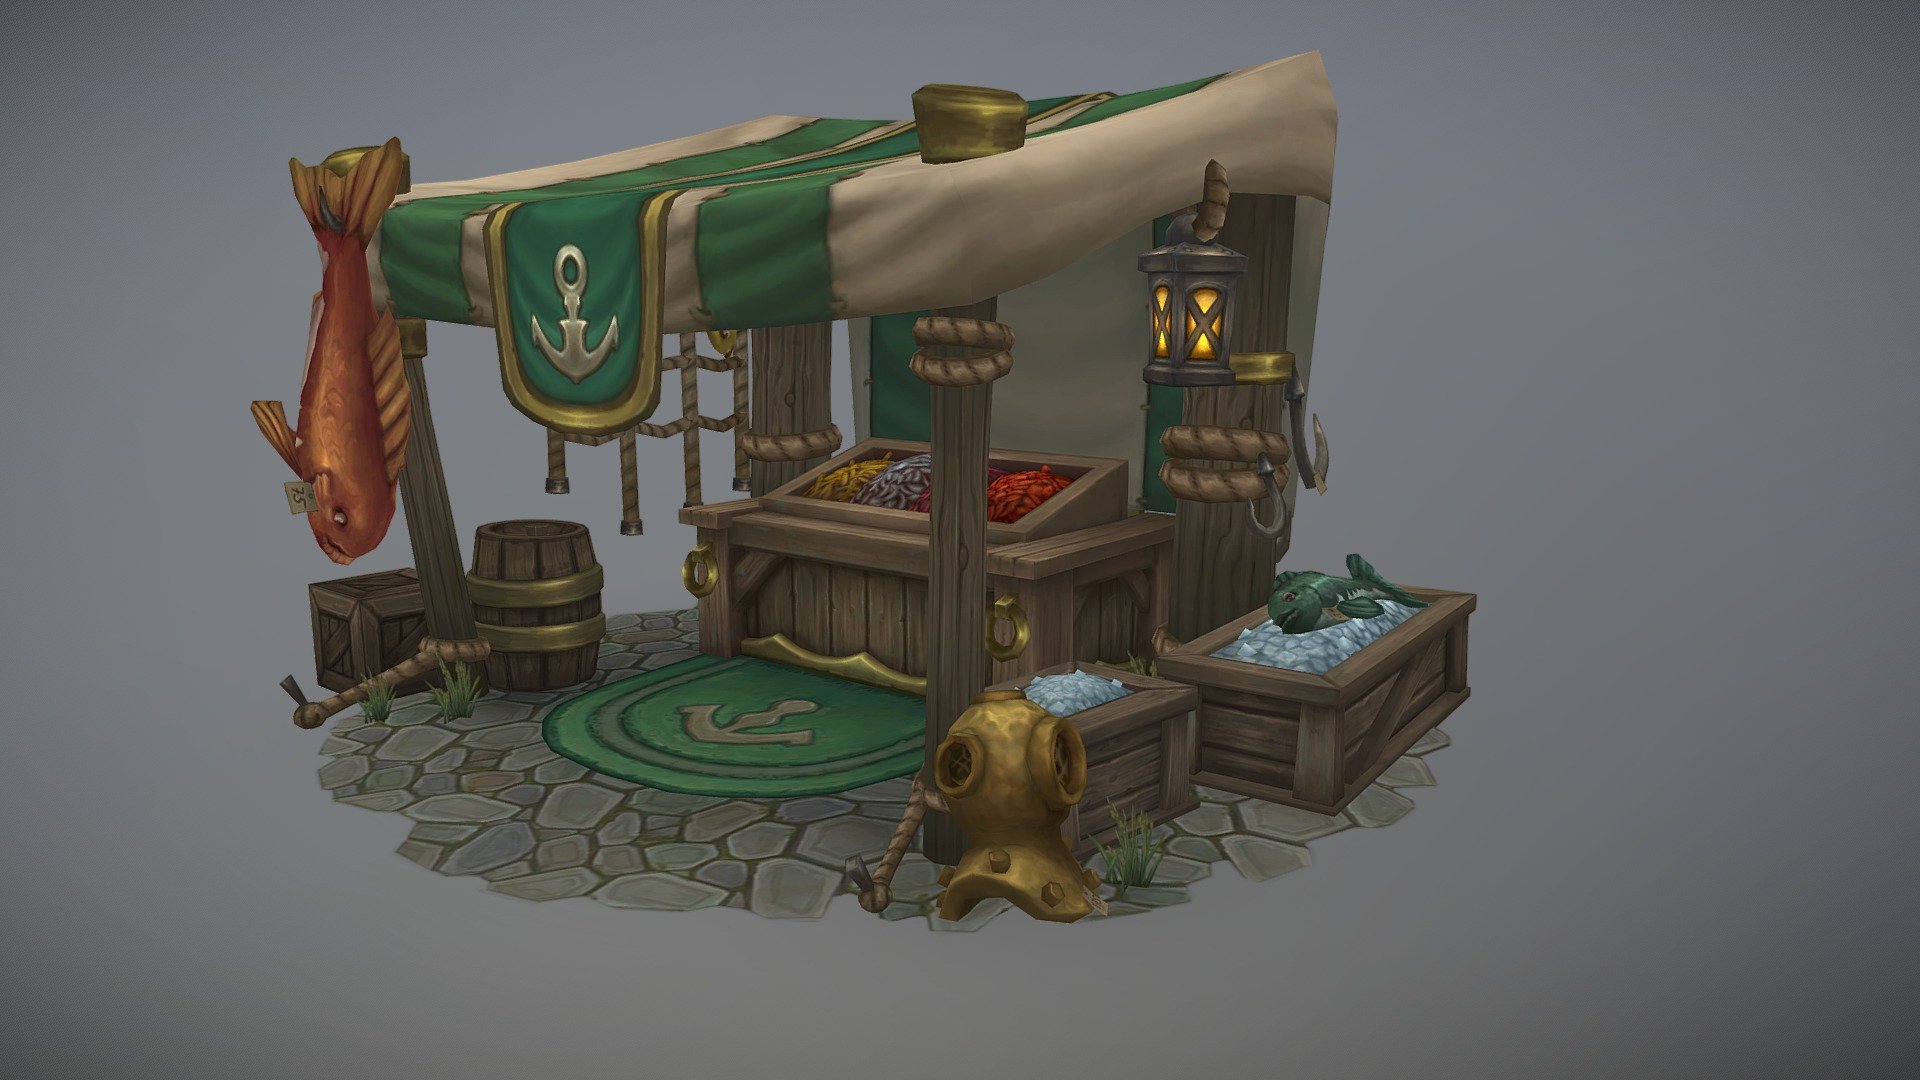 This is a piece inspired by the new city Boralus in World of Warcraft - Boralus Fish Market - 3D model by NikoGesell 3d model